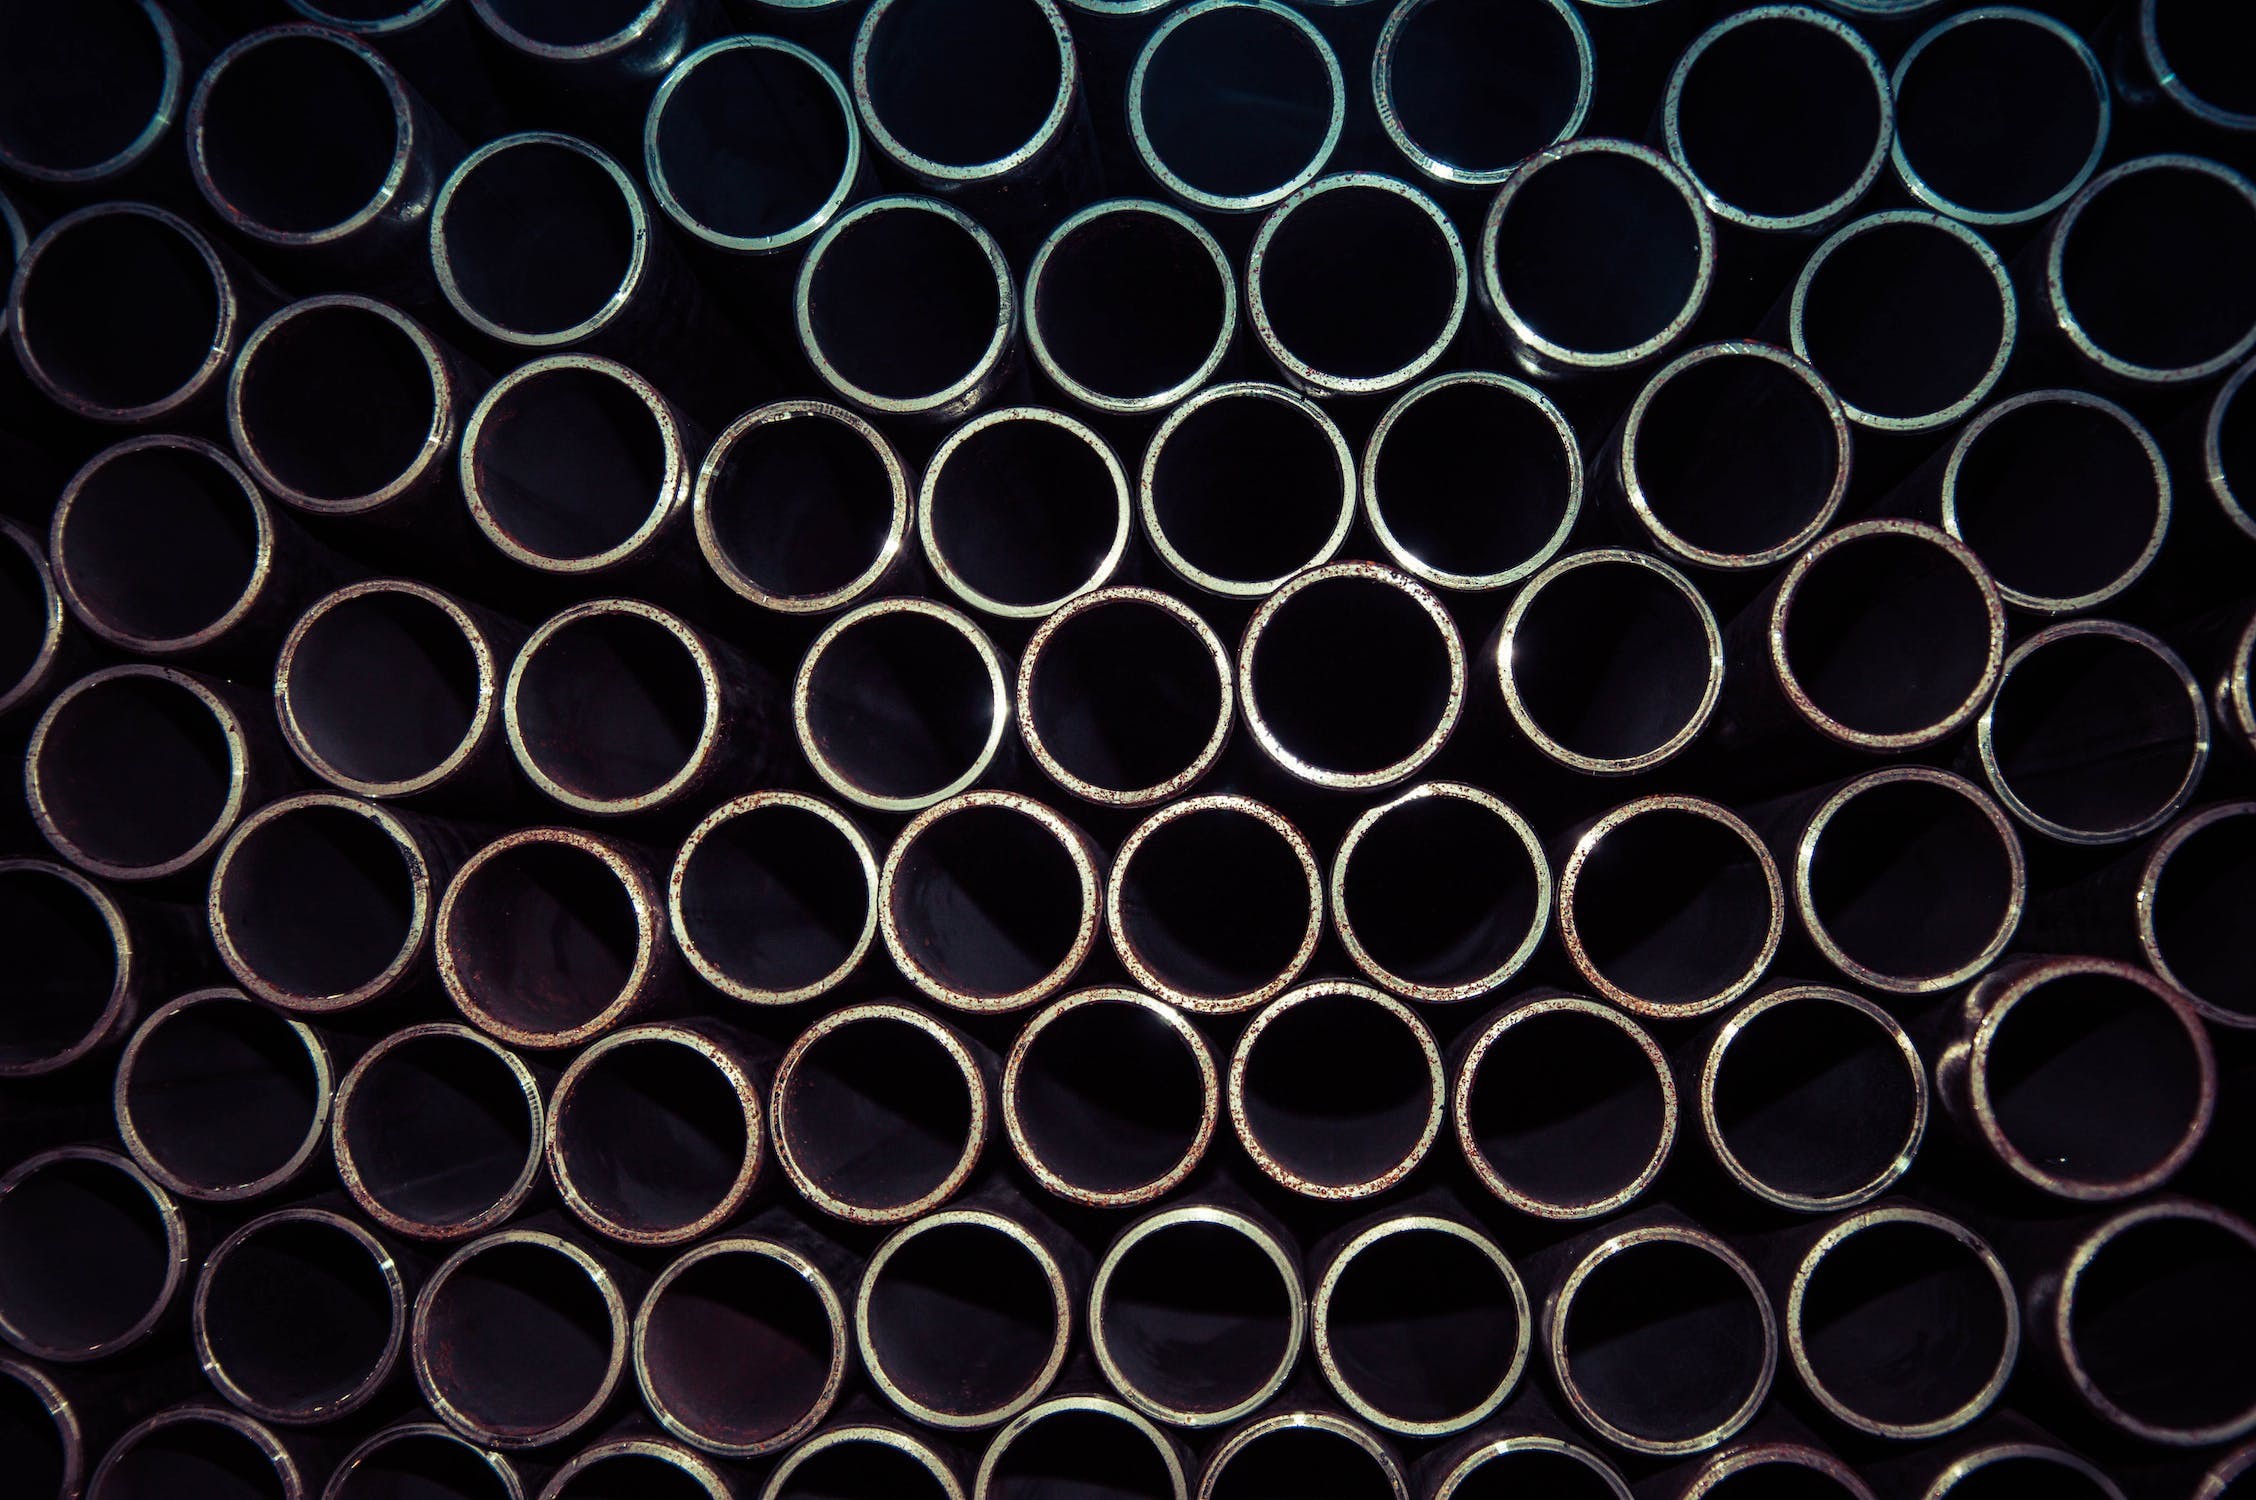 What is a Reinforced Thermoplastic Pipe (RTP) or Flexible Composite Pipe (FCP)?